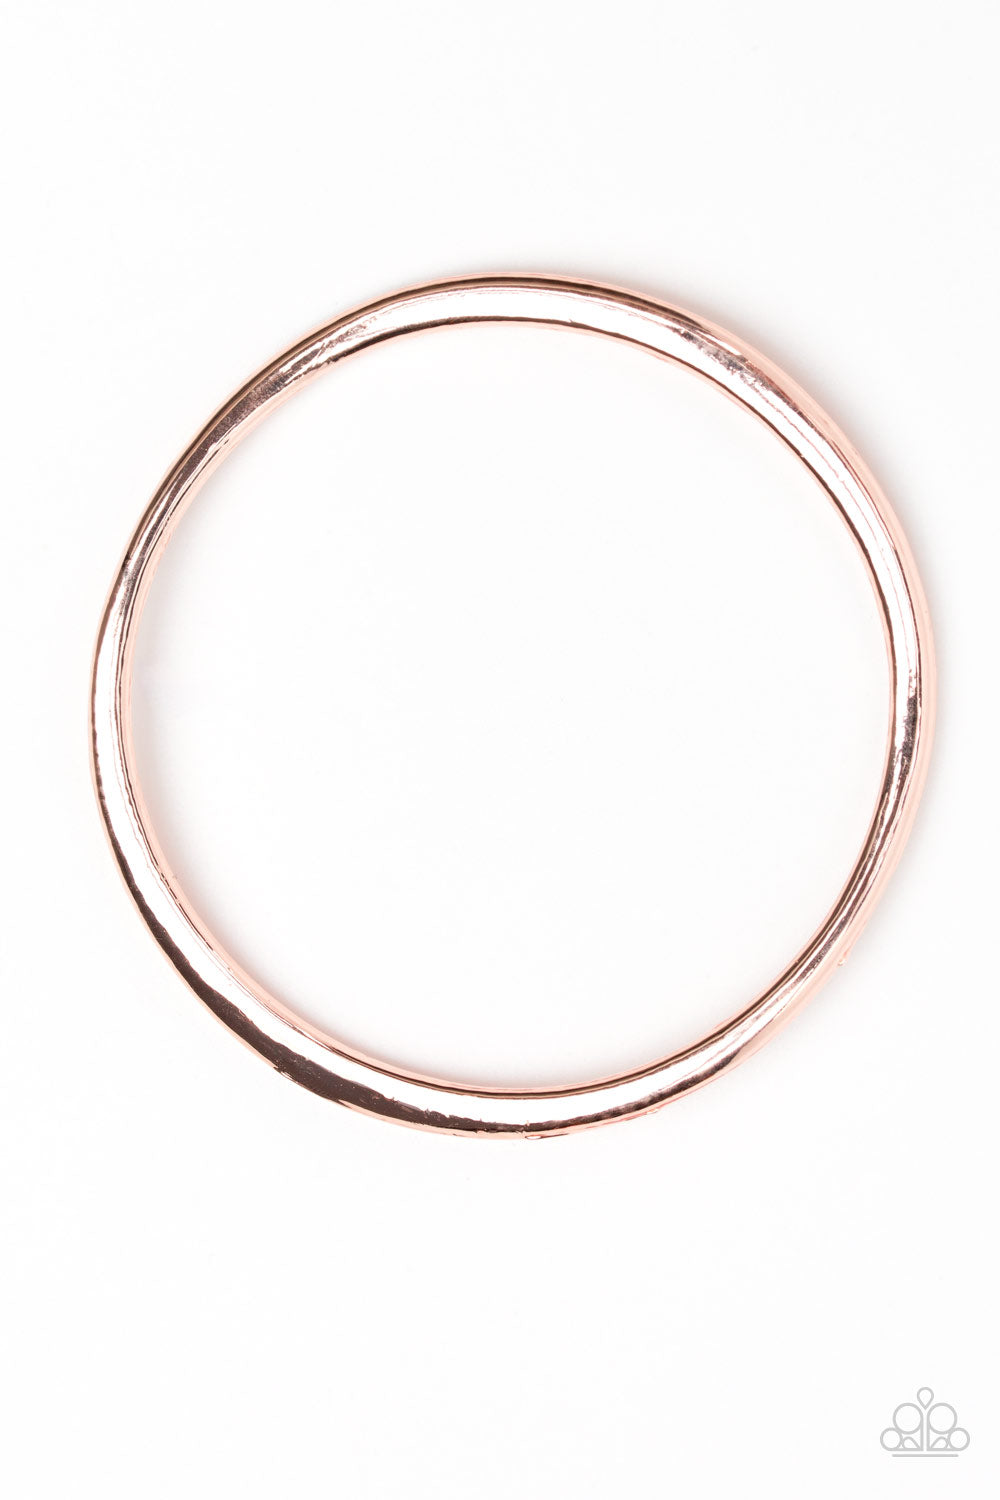 Awesomely Asymmetrical Rose Gold Bangle Bracelet - Paparazzi Accessories